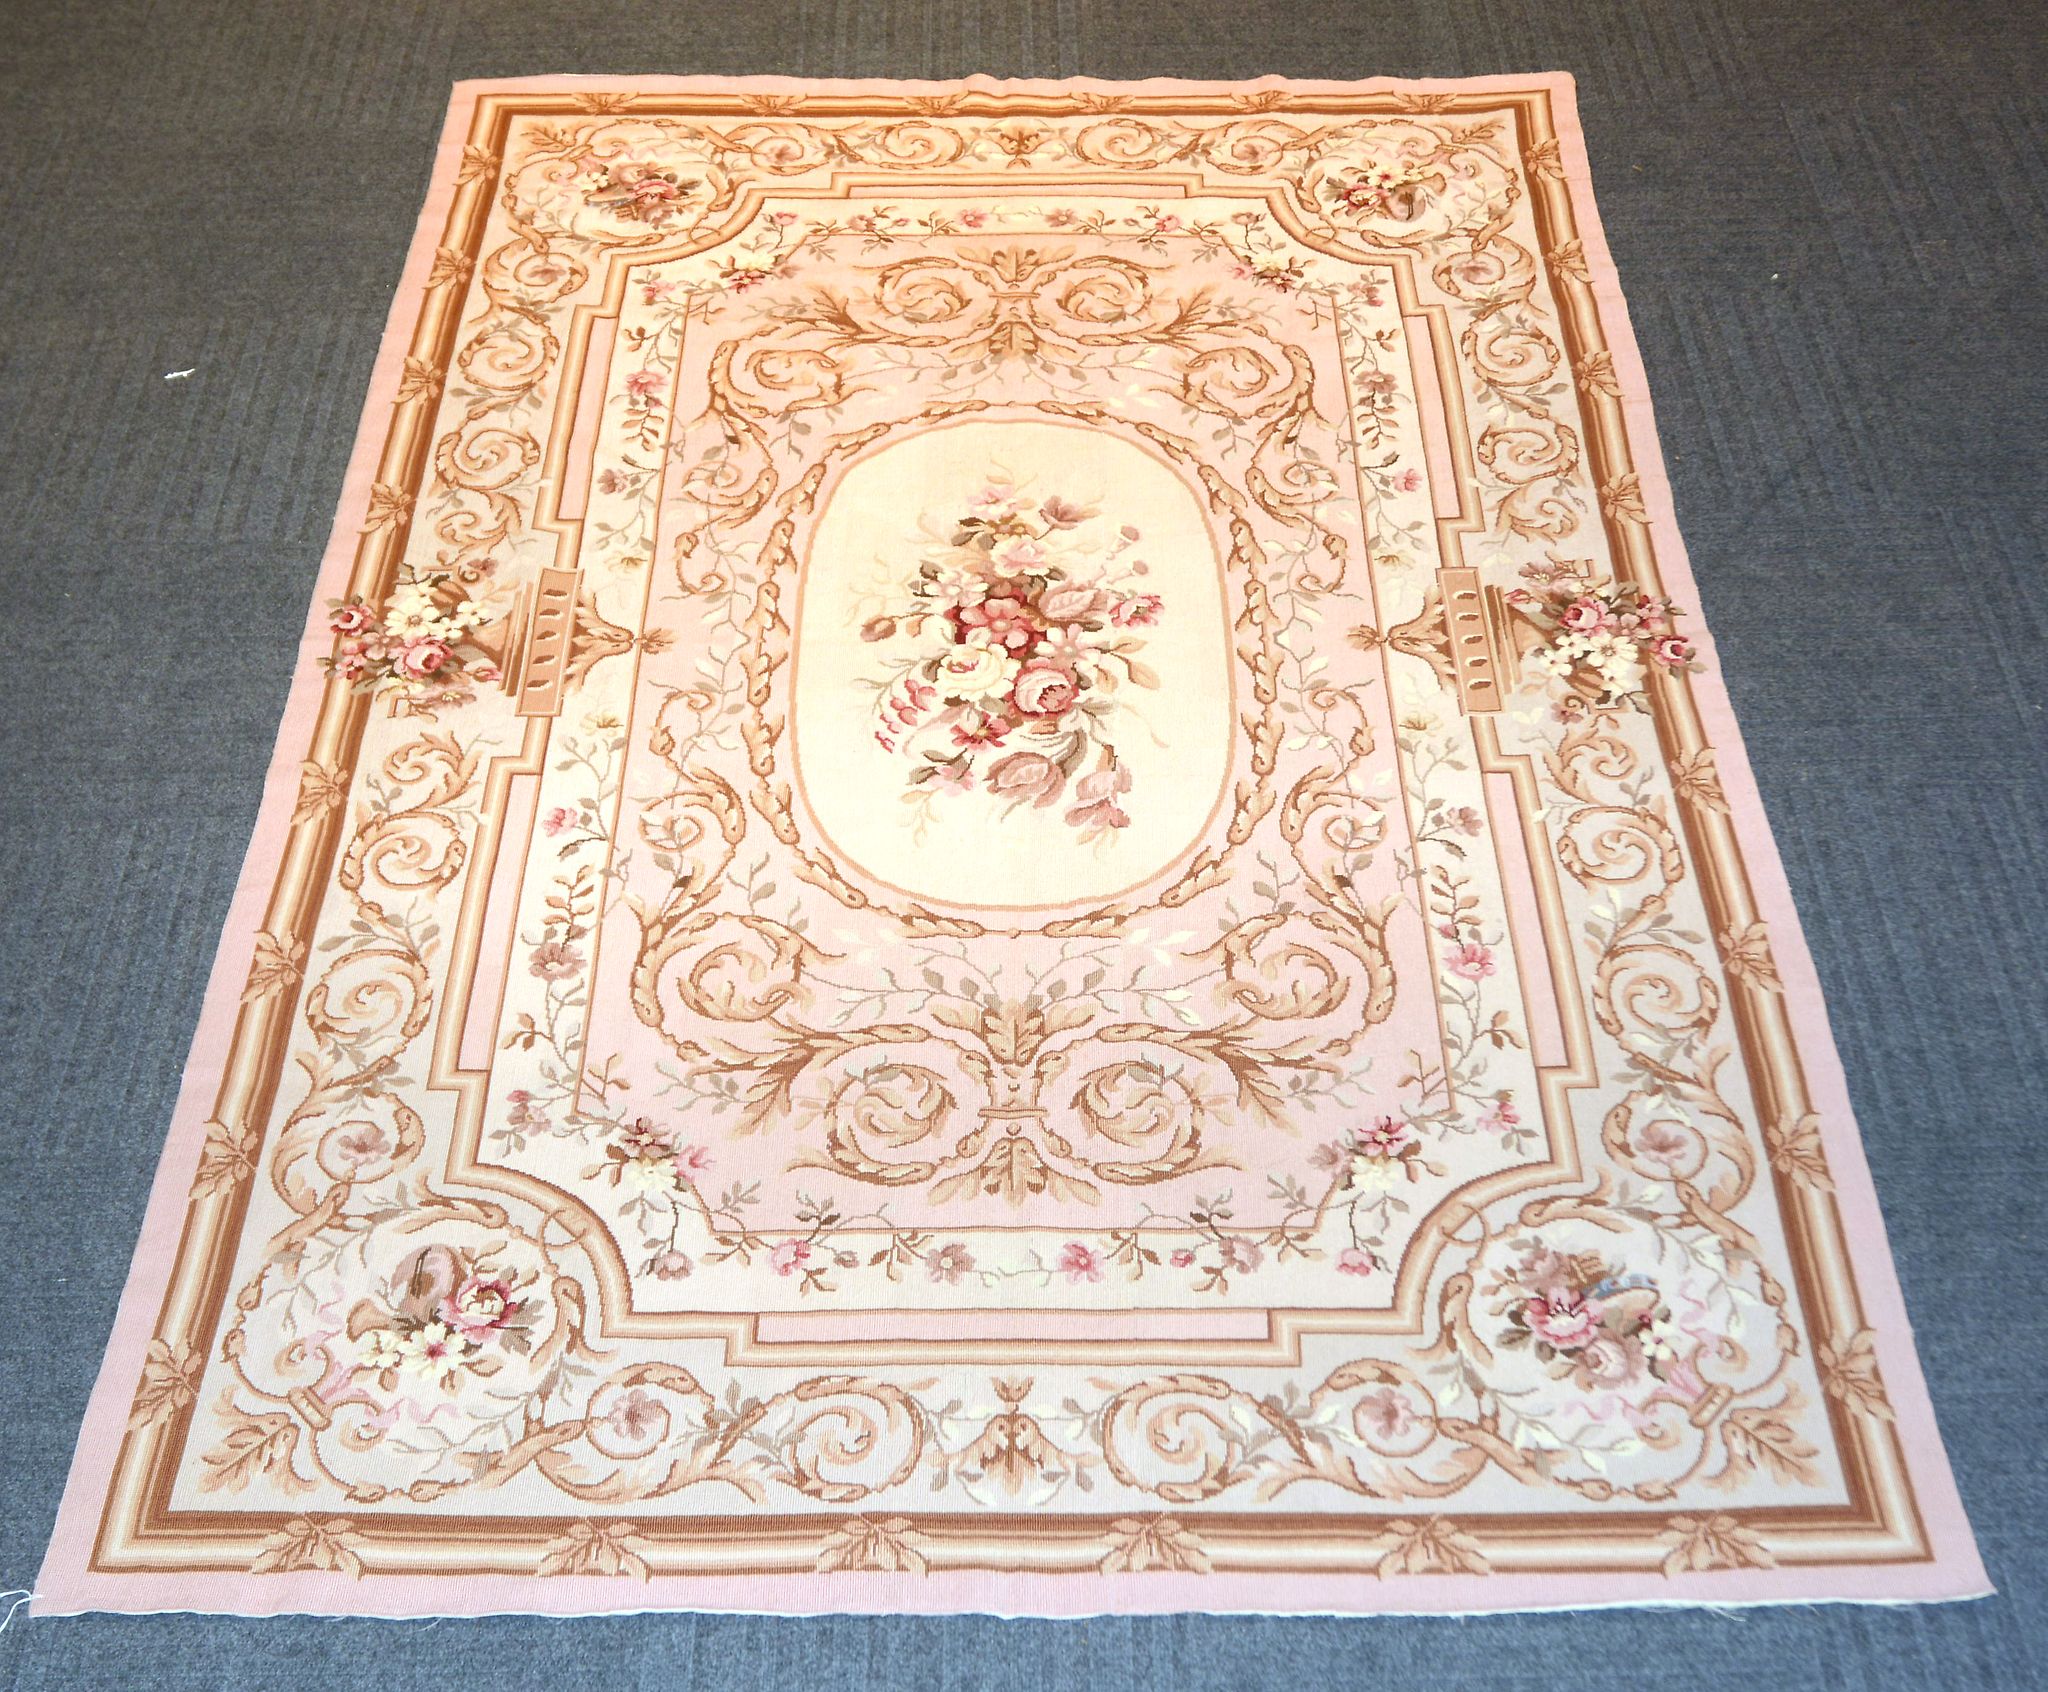 A modern rug in Aubusson style, woven in shades of pale pink, sepia, and cream